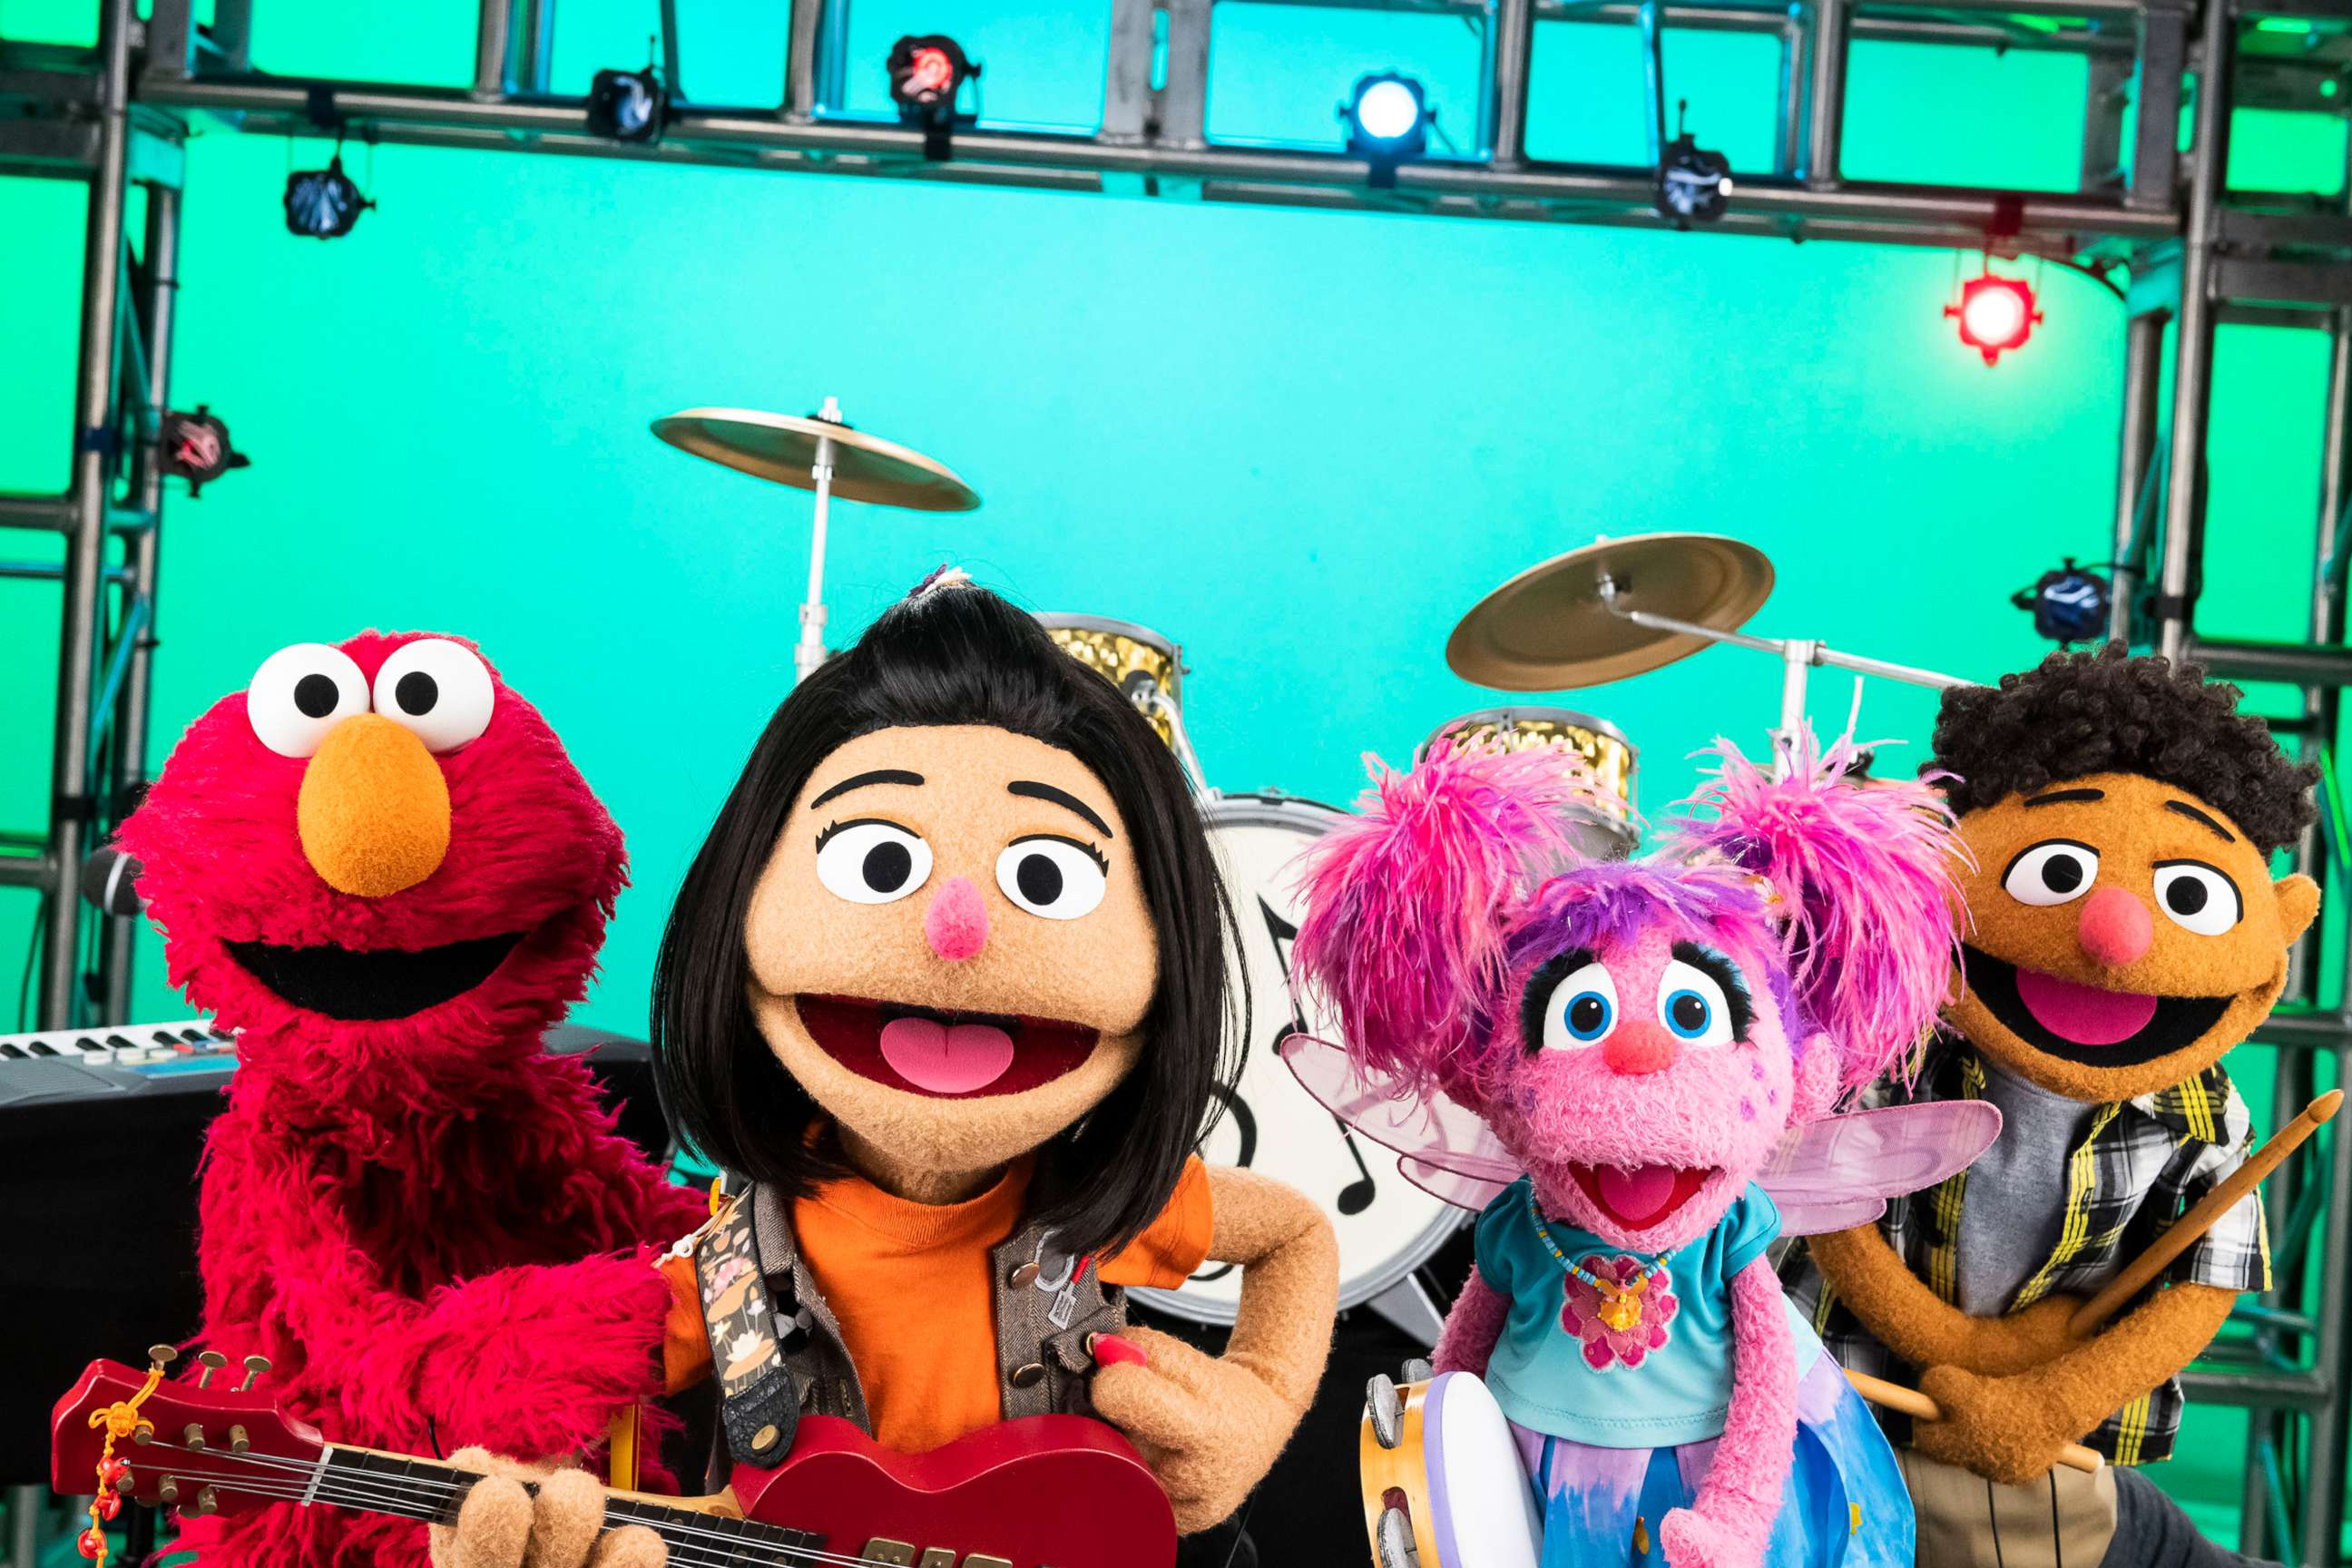 PHOTO: Sesame Street introduces its first Asian-American muppet. Seven year-old Ji-Young, second from left, is pictured alongside other Sesame Street characters.
